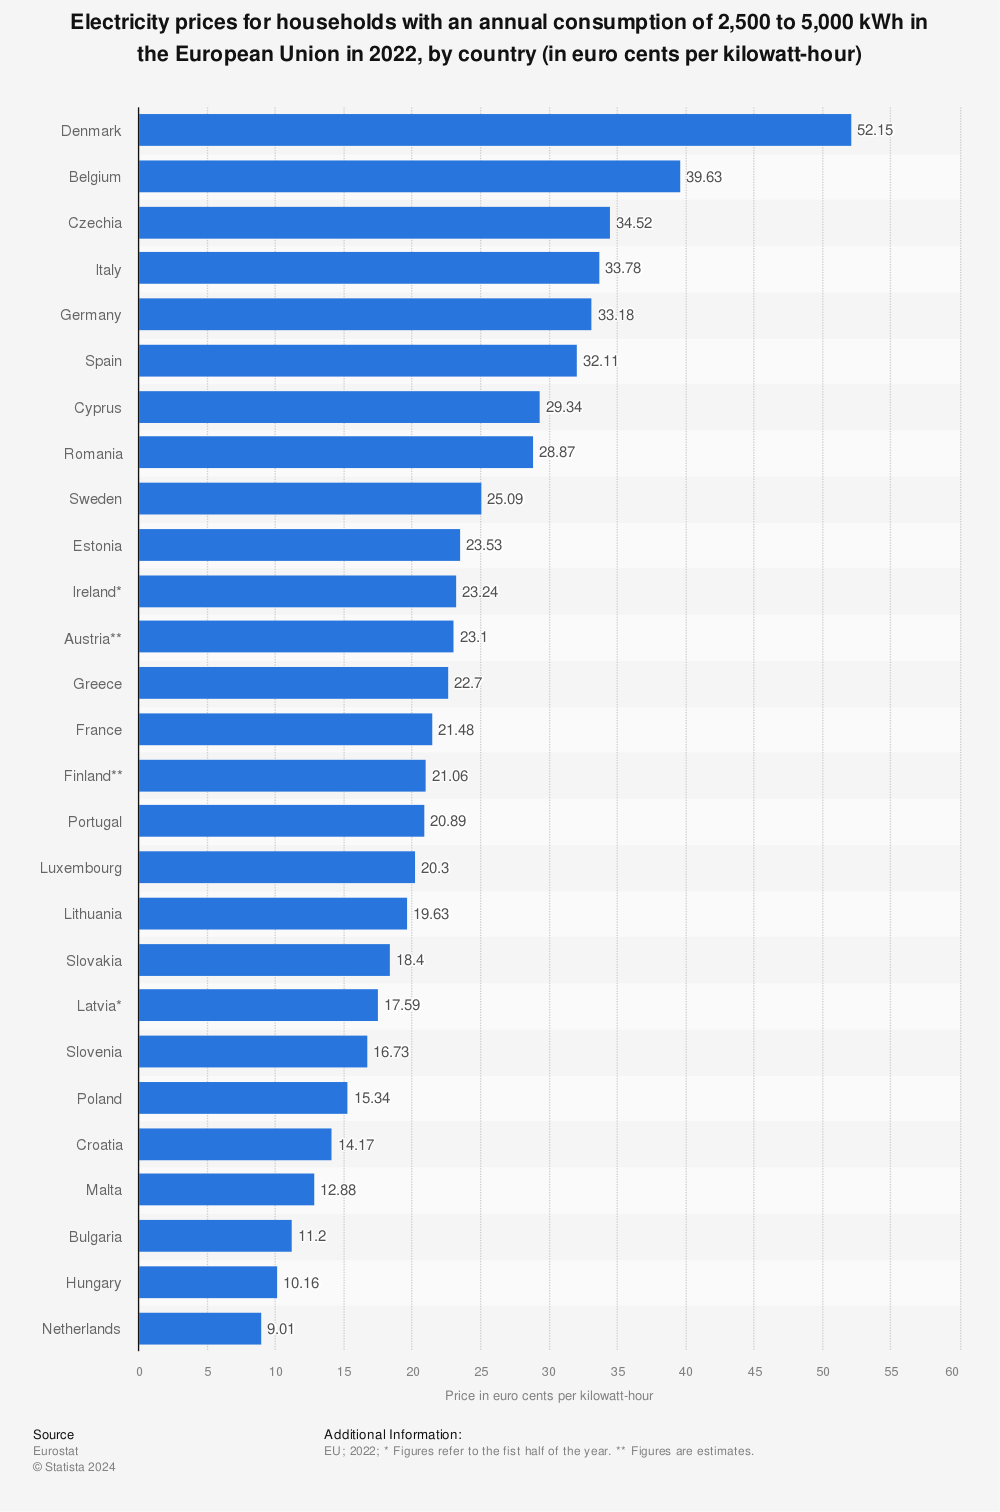 Statistic: Electricity prices for households with an annual consumption of 2,500 to 5,000 kWh in the European Union in 2022, by country (in euro cents per kilowatt-hour) | Statista